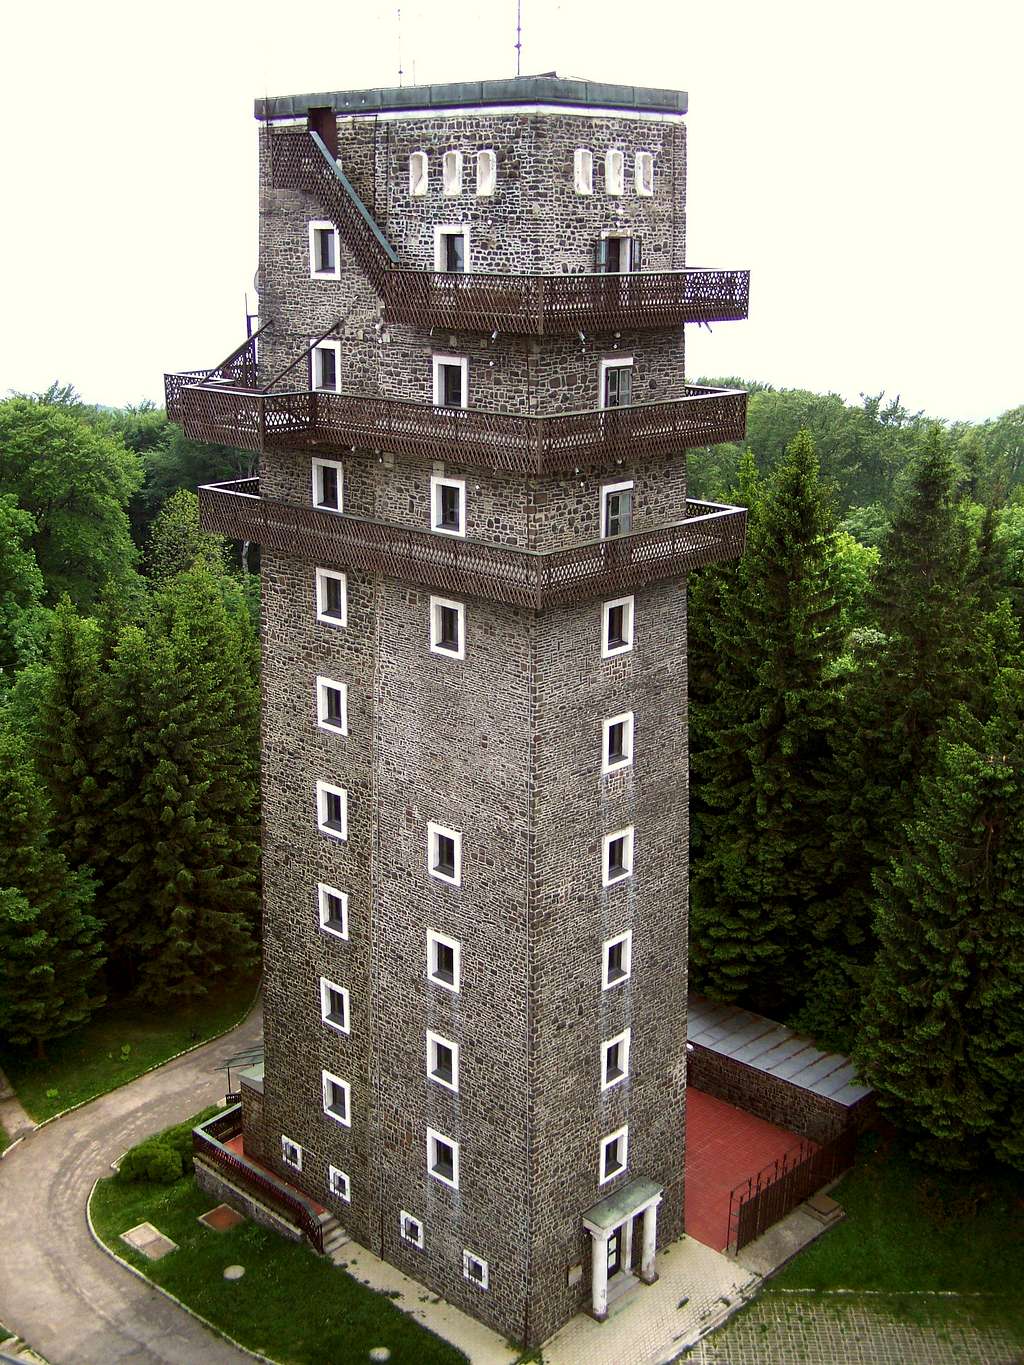 The old tower as seen from the new TV-tower on Kékes